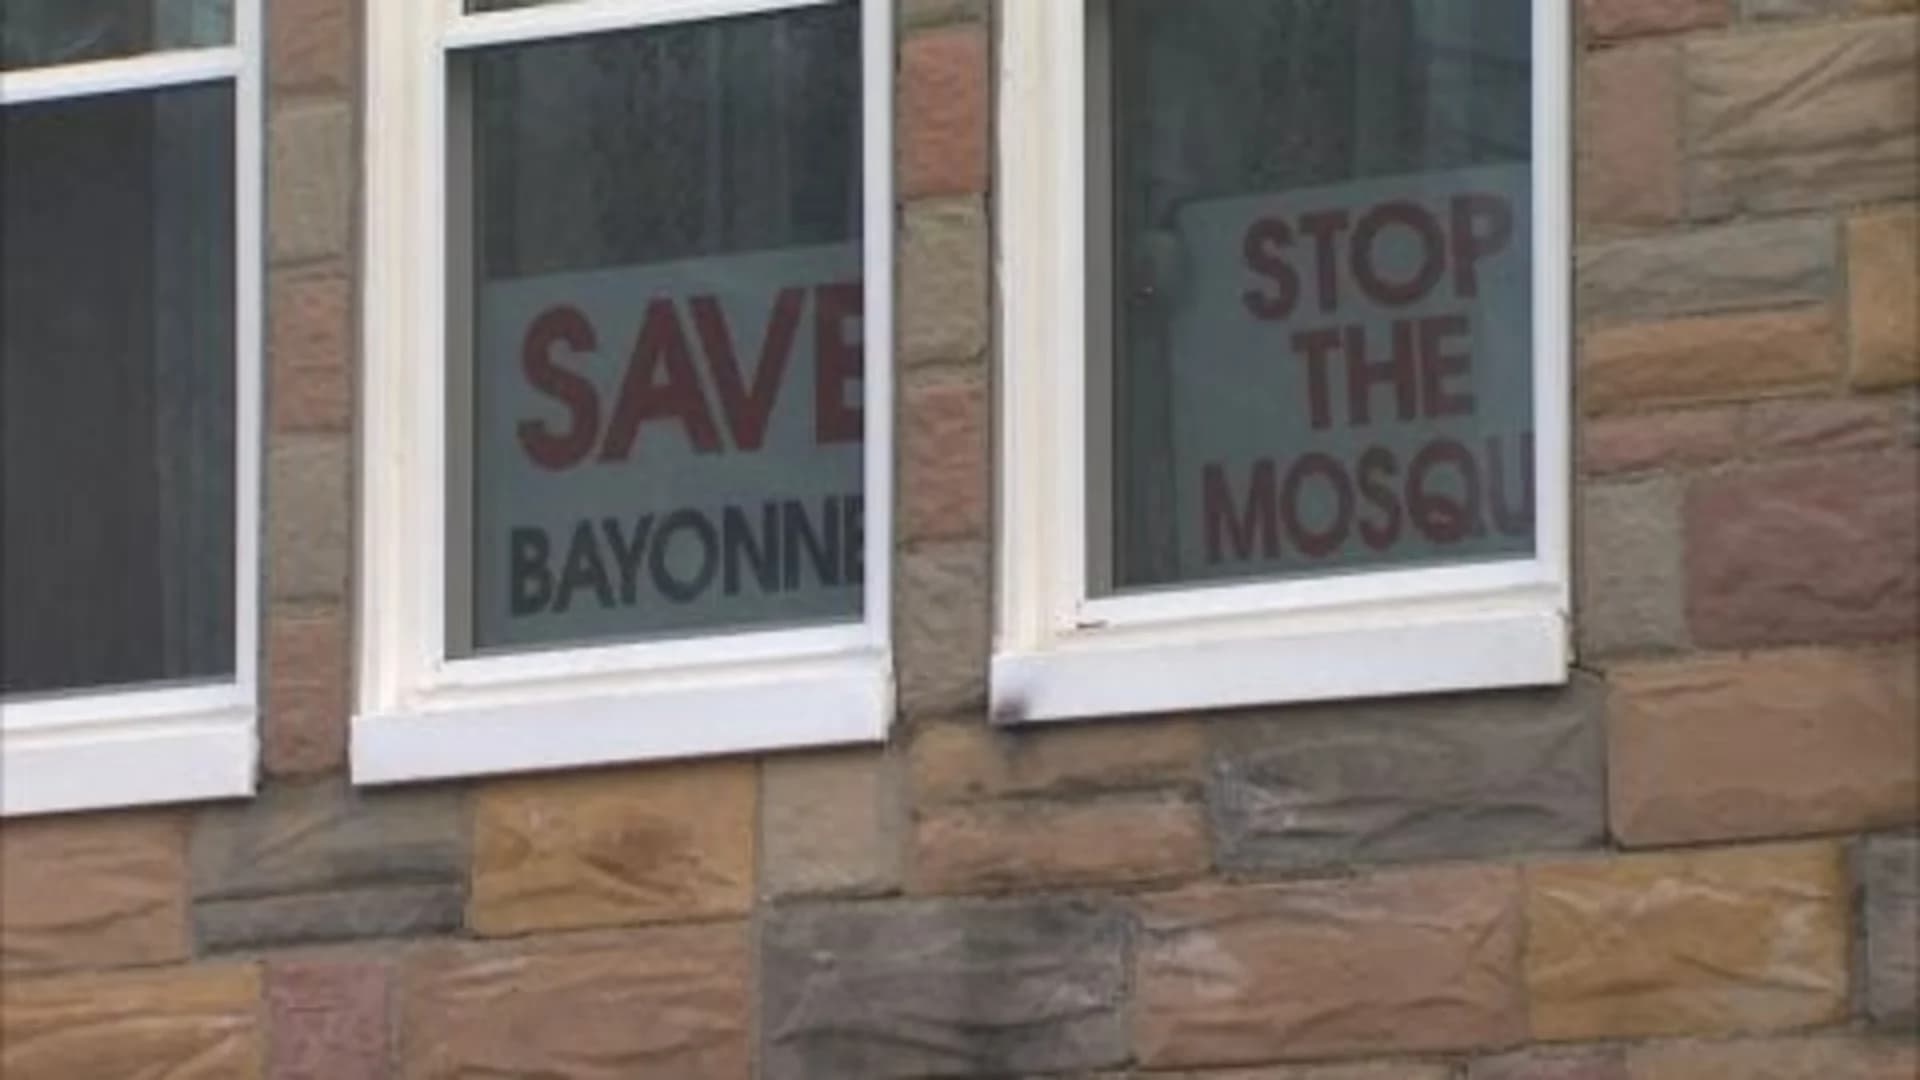 Federal investigation opened after Bayonne votes down mosque